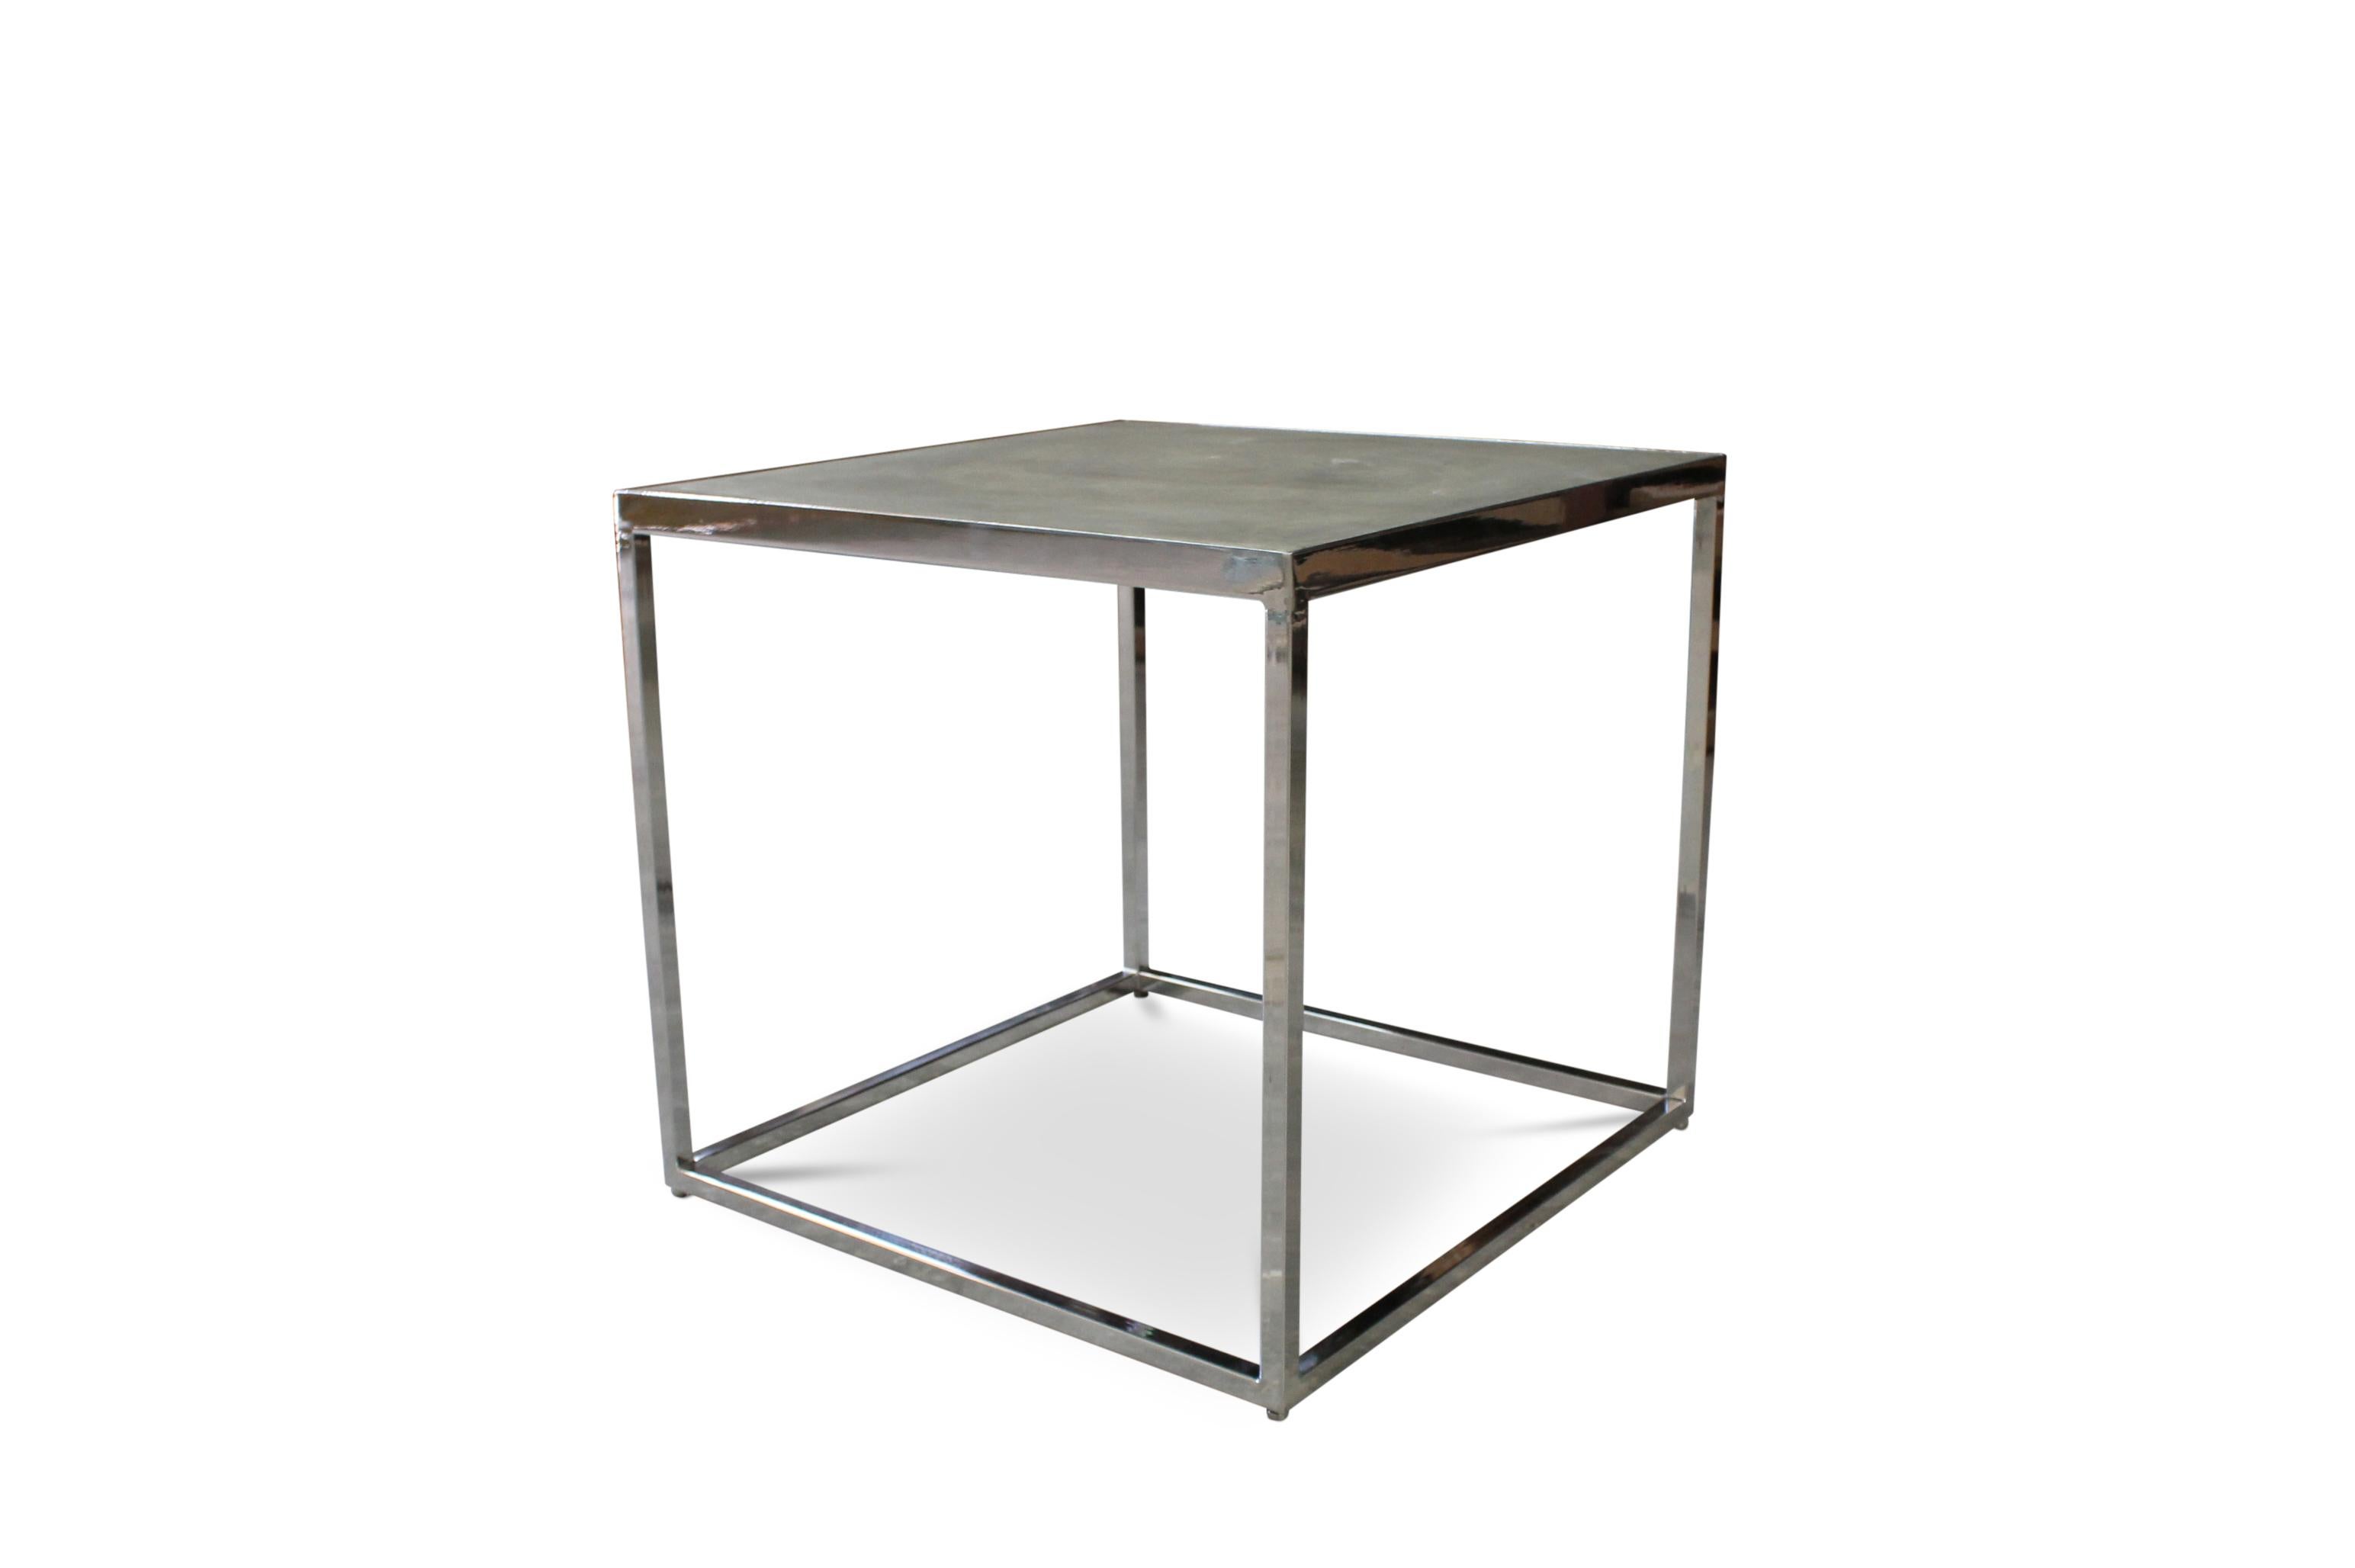 Argentine Modern Polished Steel and Concrete Side Table by Costantini, Jesse For Sale